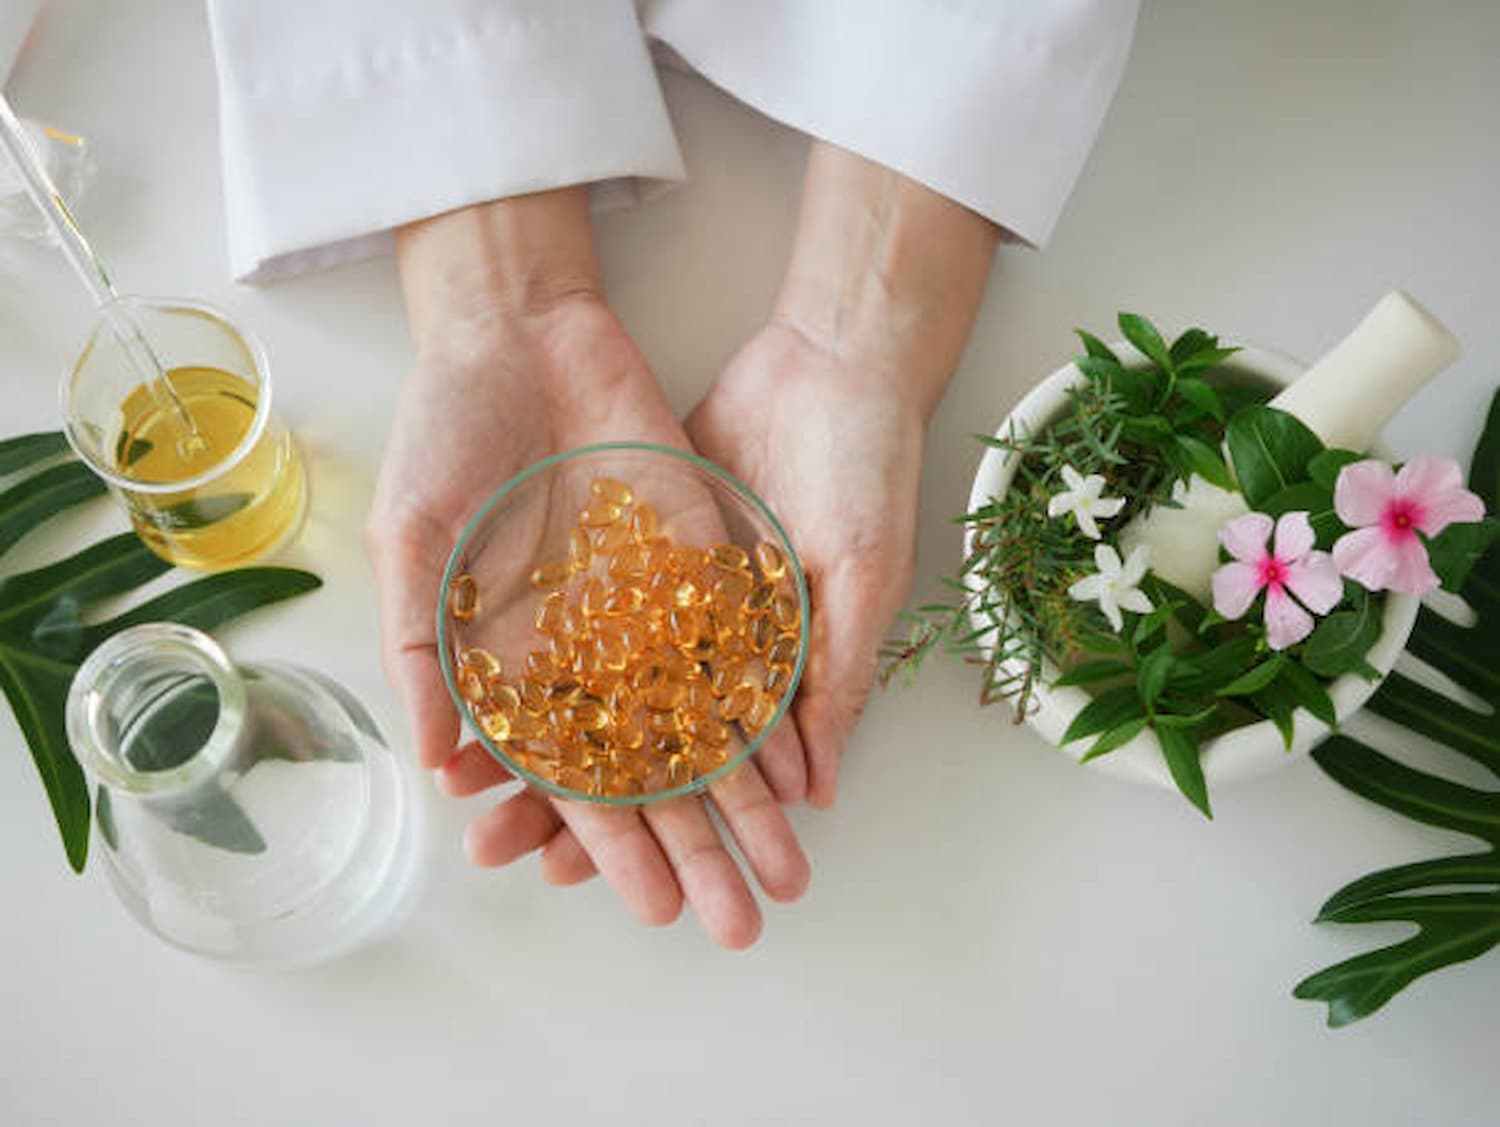 Why Should You Consider a Career in Naturopathy?